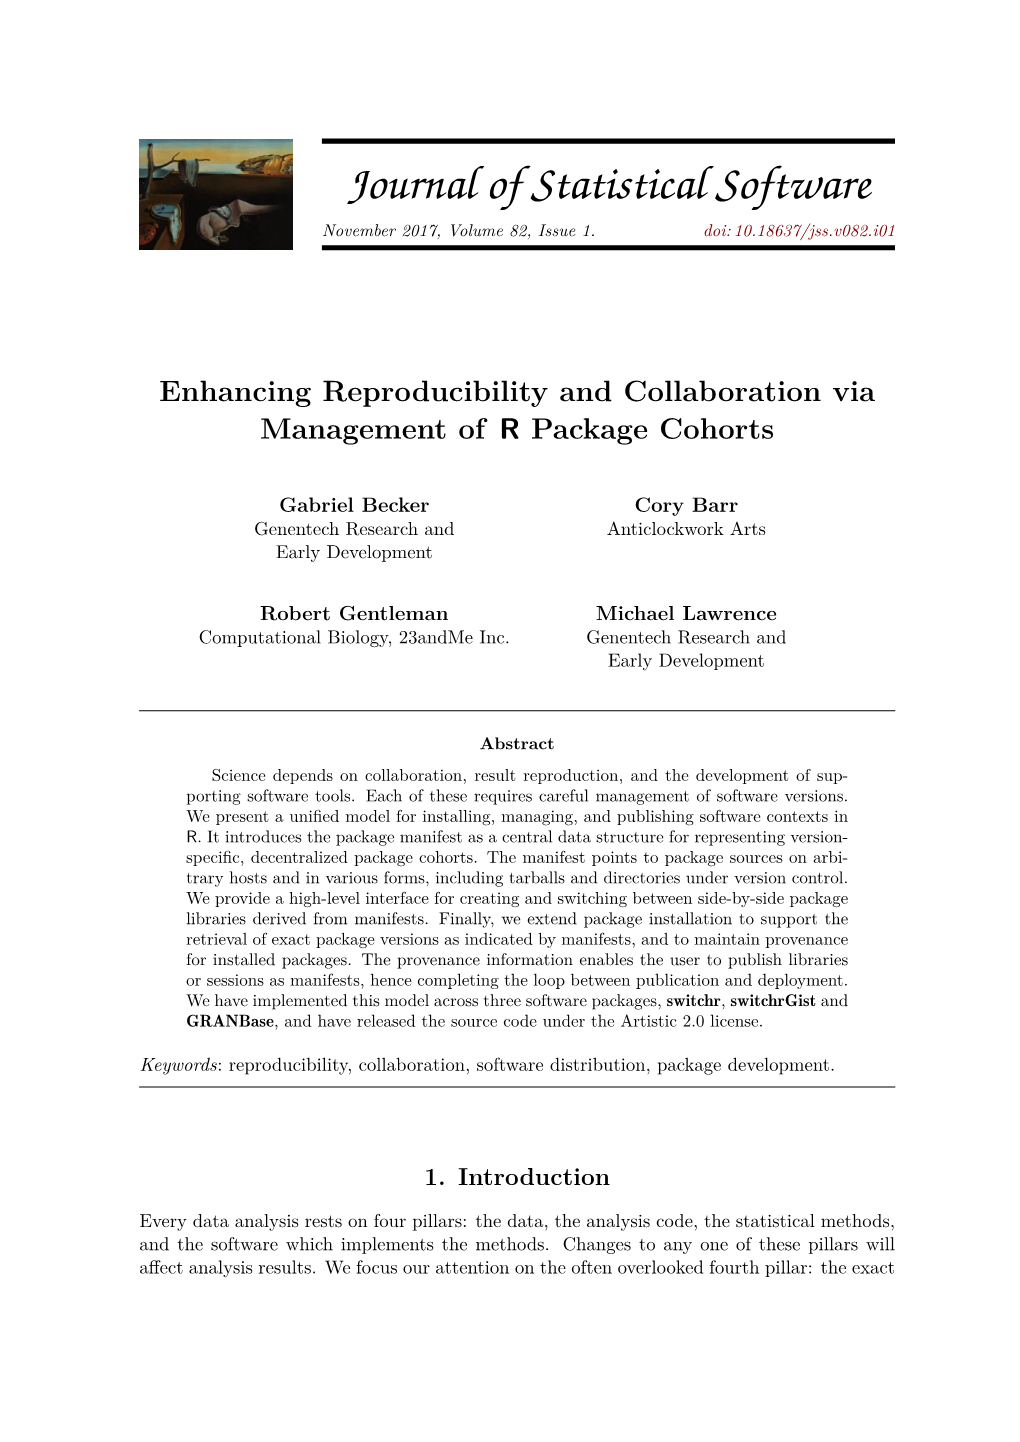 Enhancing Reproducibility and Collaboration Via Management of R Package Cohorts